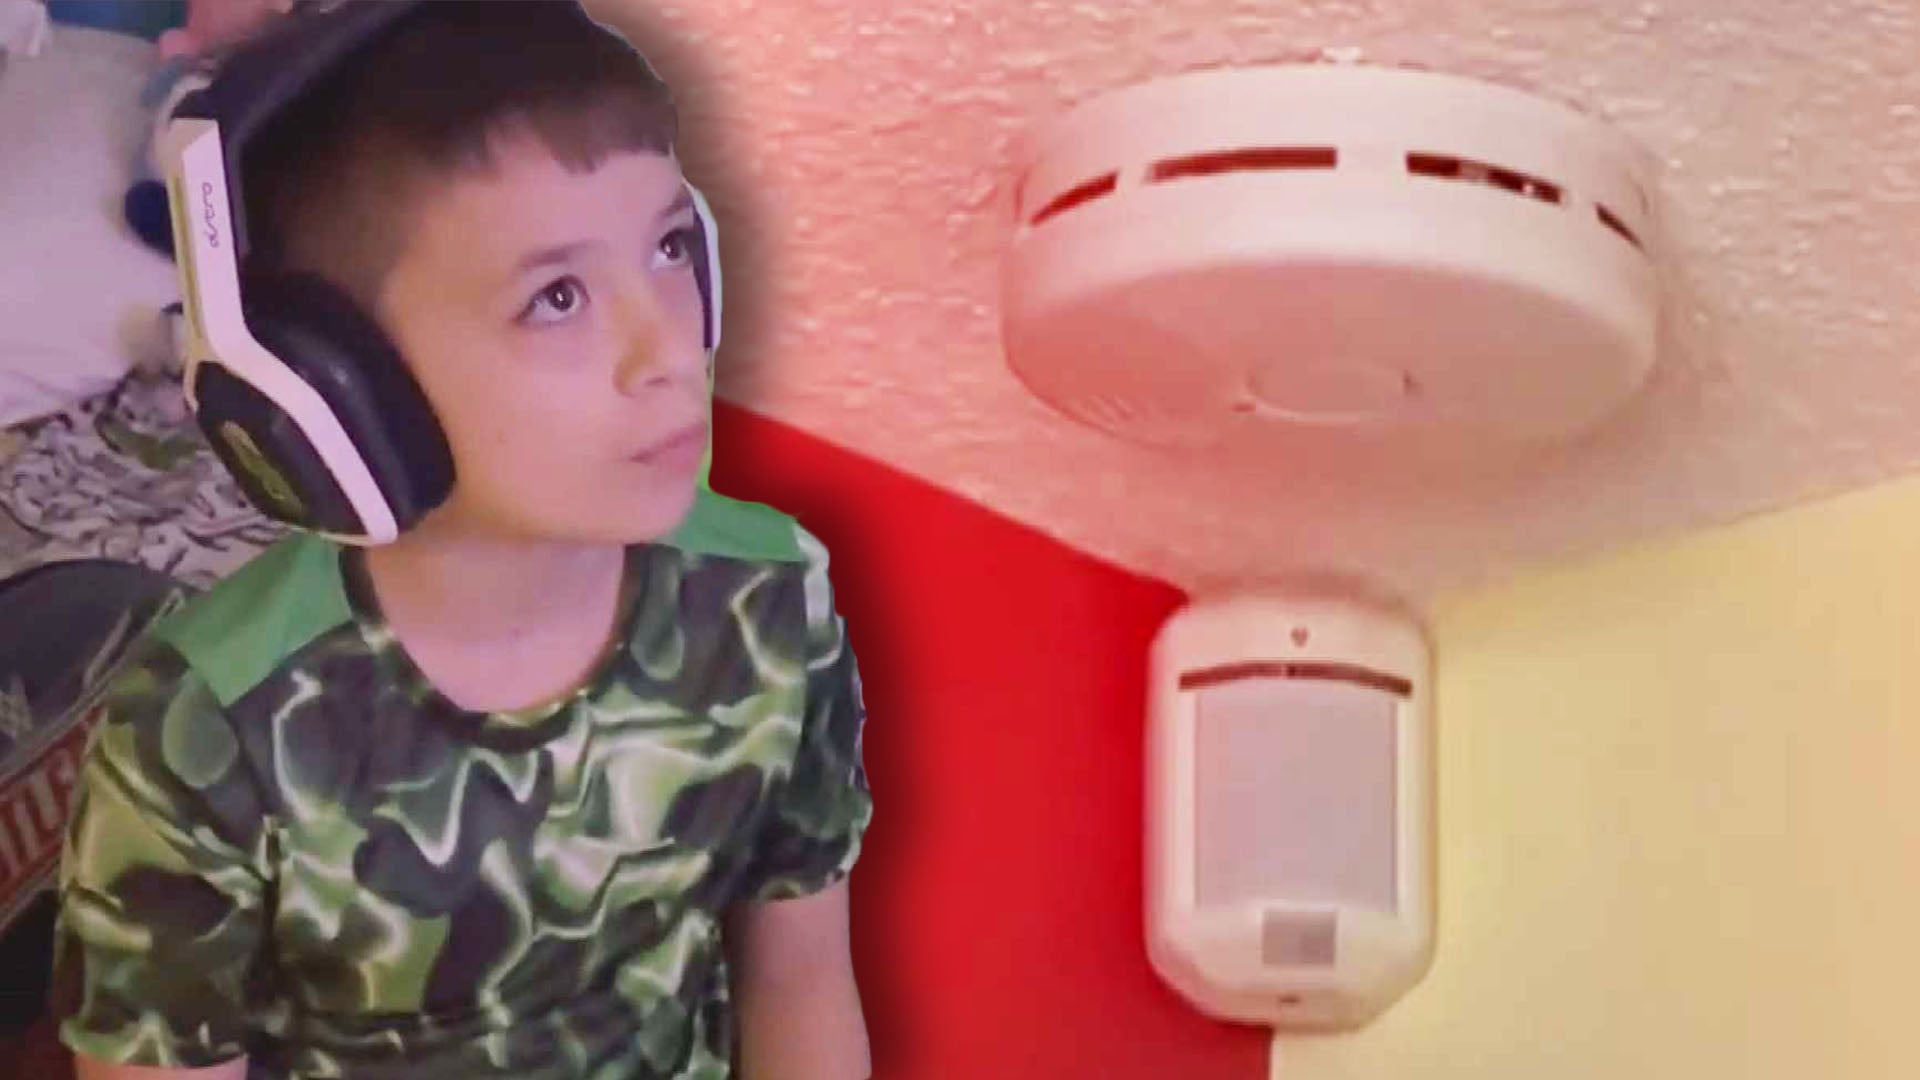 10-Year-Old Saves Family From Nearly Fatal Carbon Monoxide Poisoning